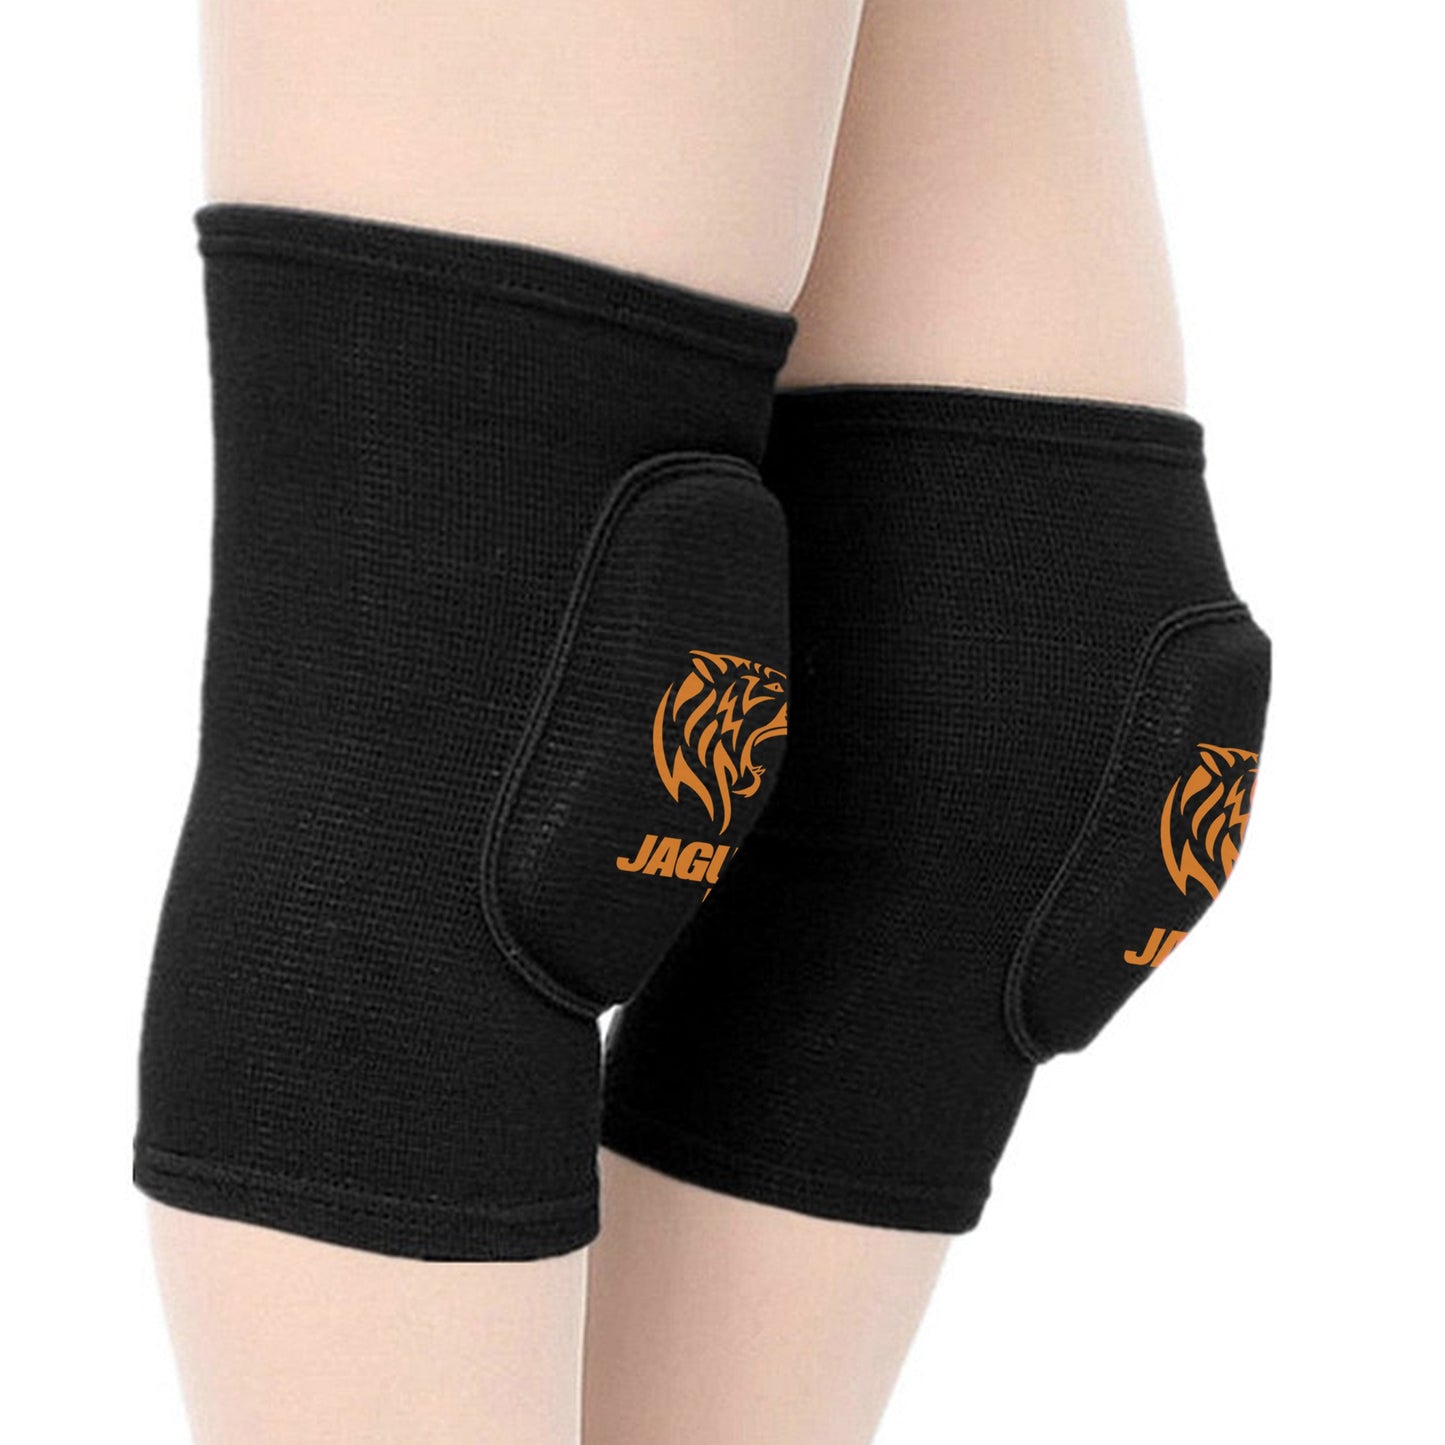 Jaguar Pro Gear - Midnight Knee Pad Pair For Boxing MMA Muay Thai And General Use Kids Adults Unisex